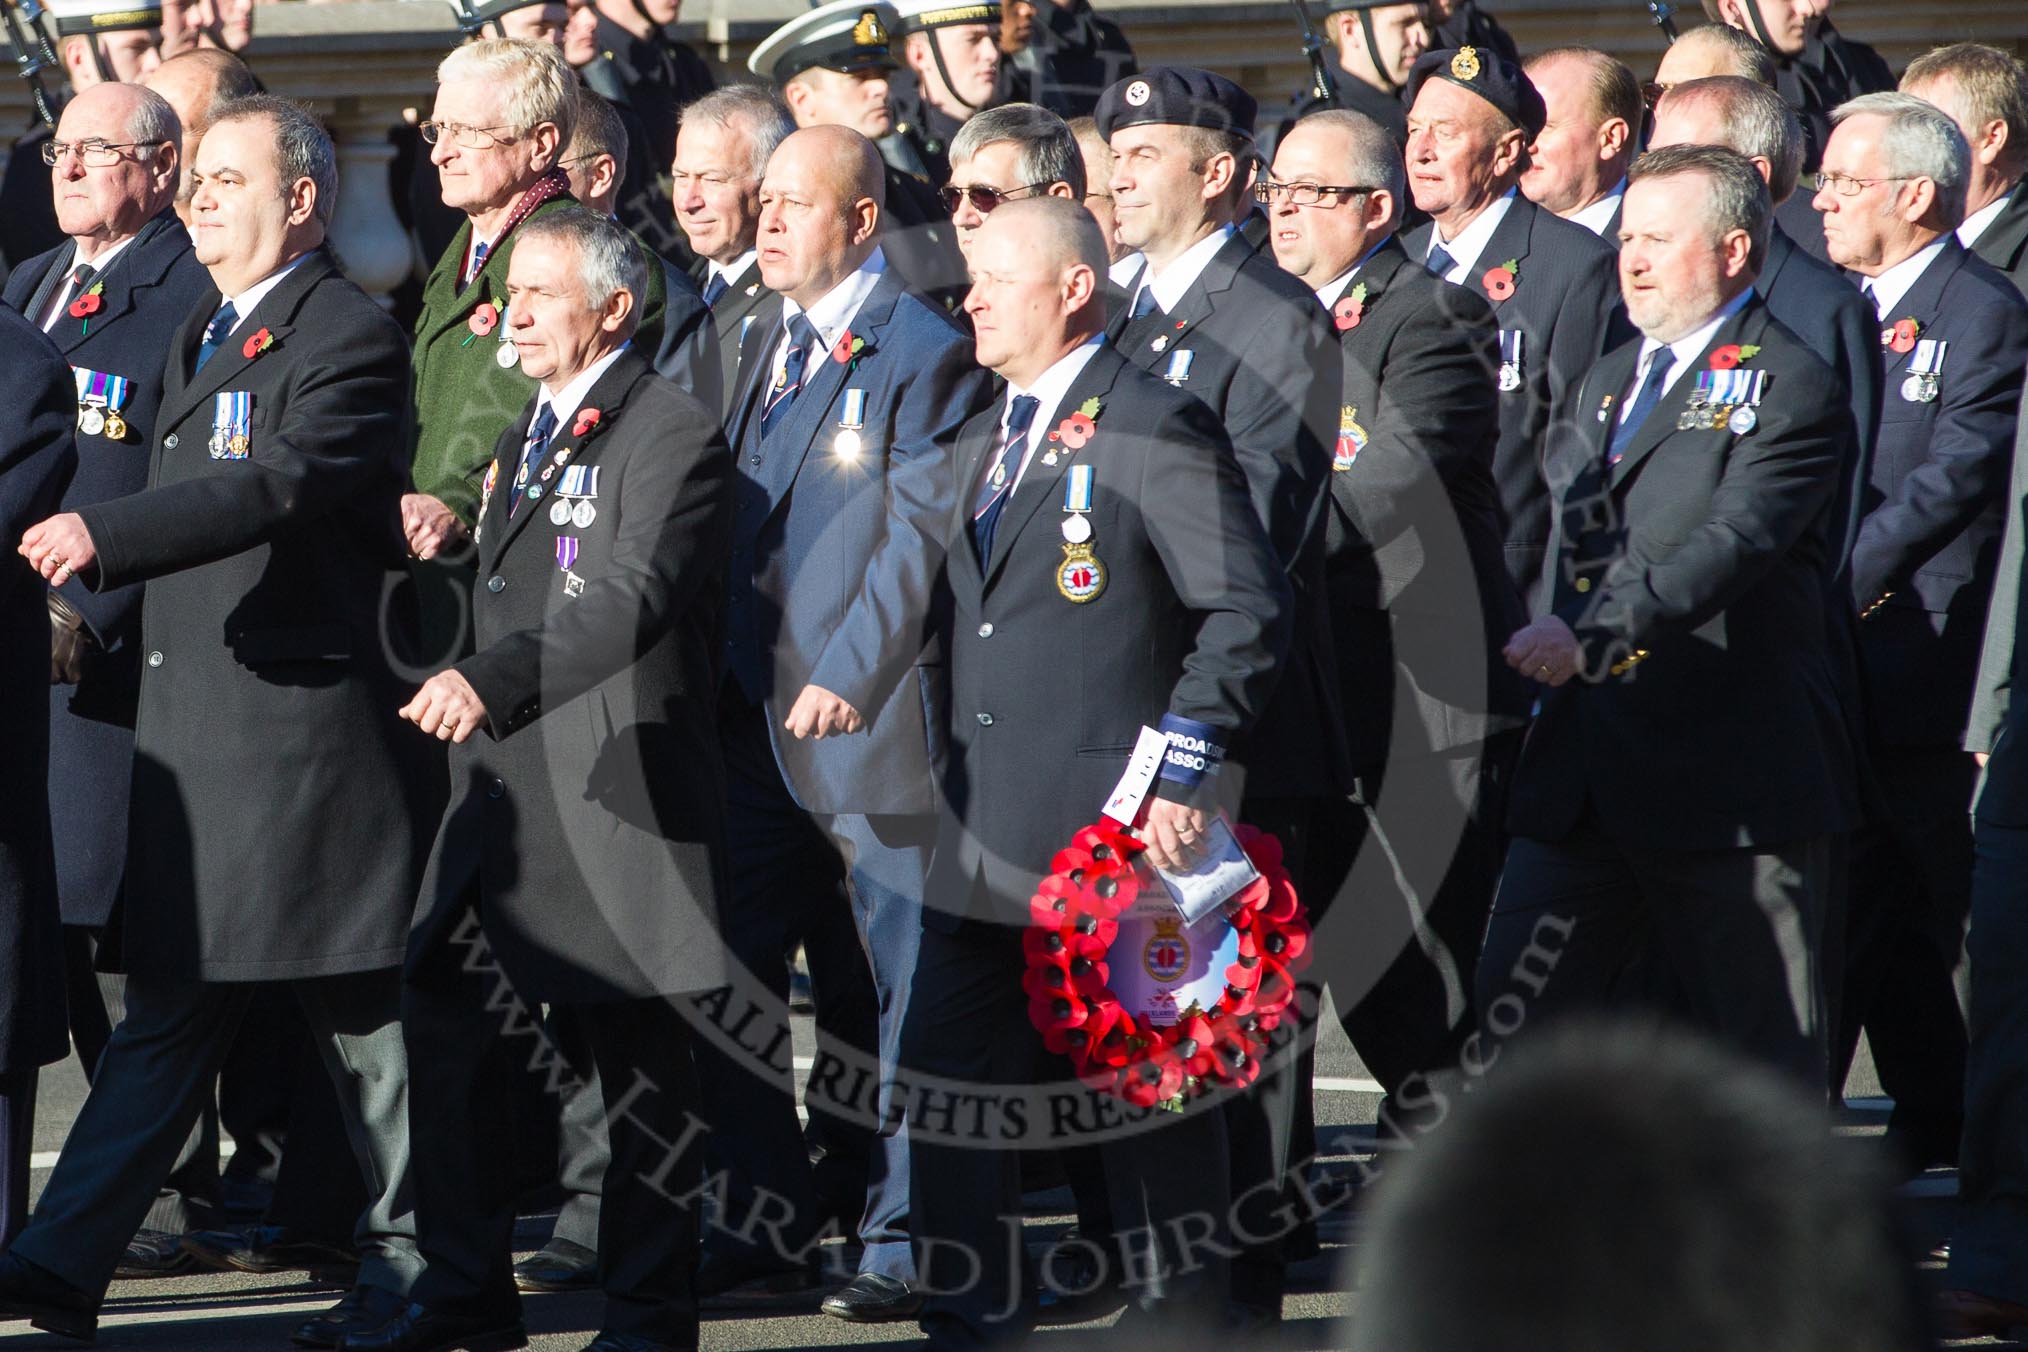 Remembrance Sunday 2012 Cenotaph March Past: Group E40 - Broadsword Association..
Whitehall, Cenotaph,
London SW1,

United Kingdom,
on 11 November 2012 at 11:42, image #287